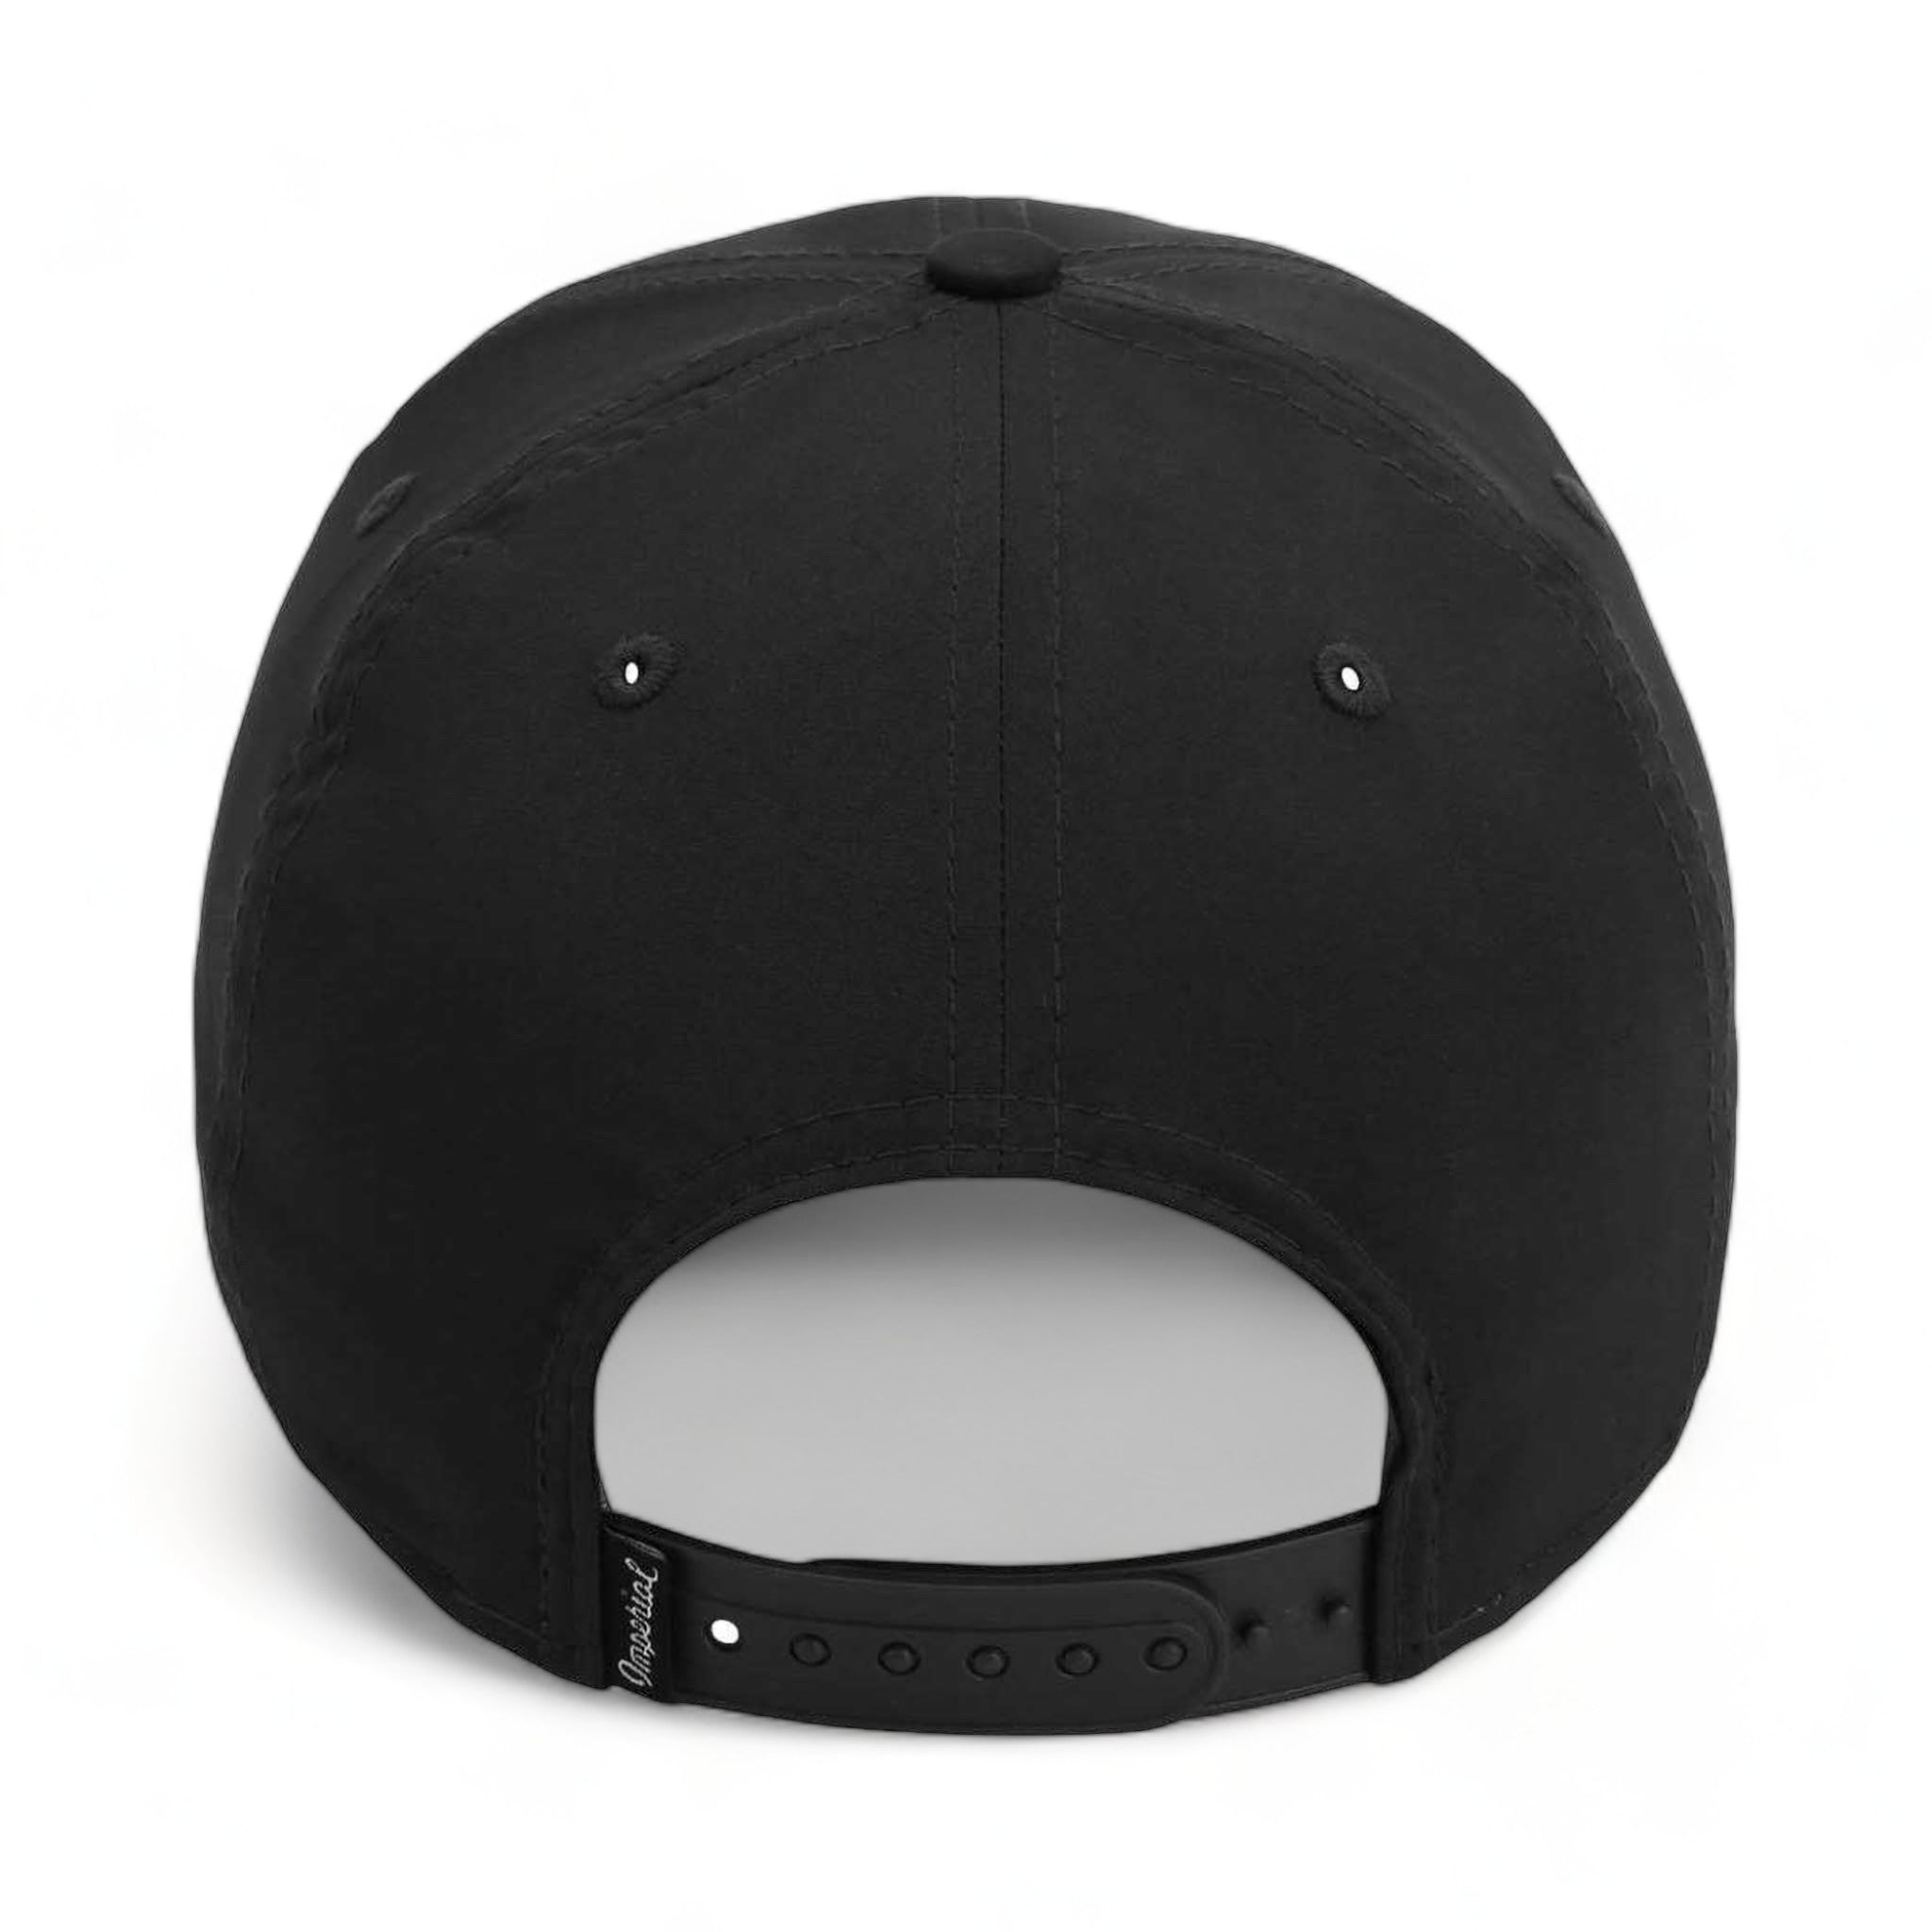 Back view of Imperial 7054 custom hat in black and white